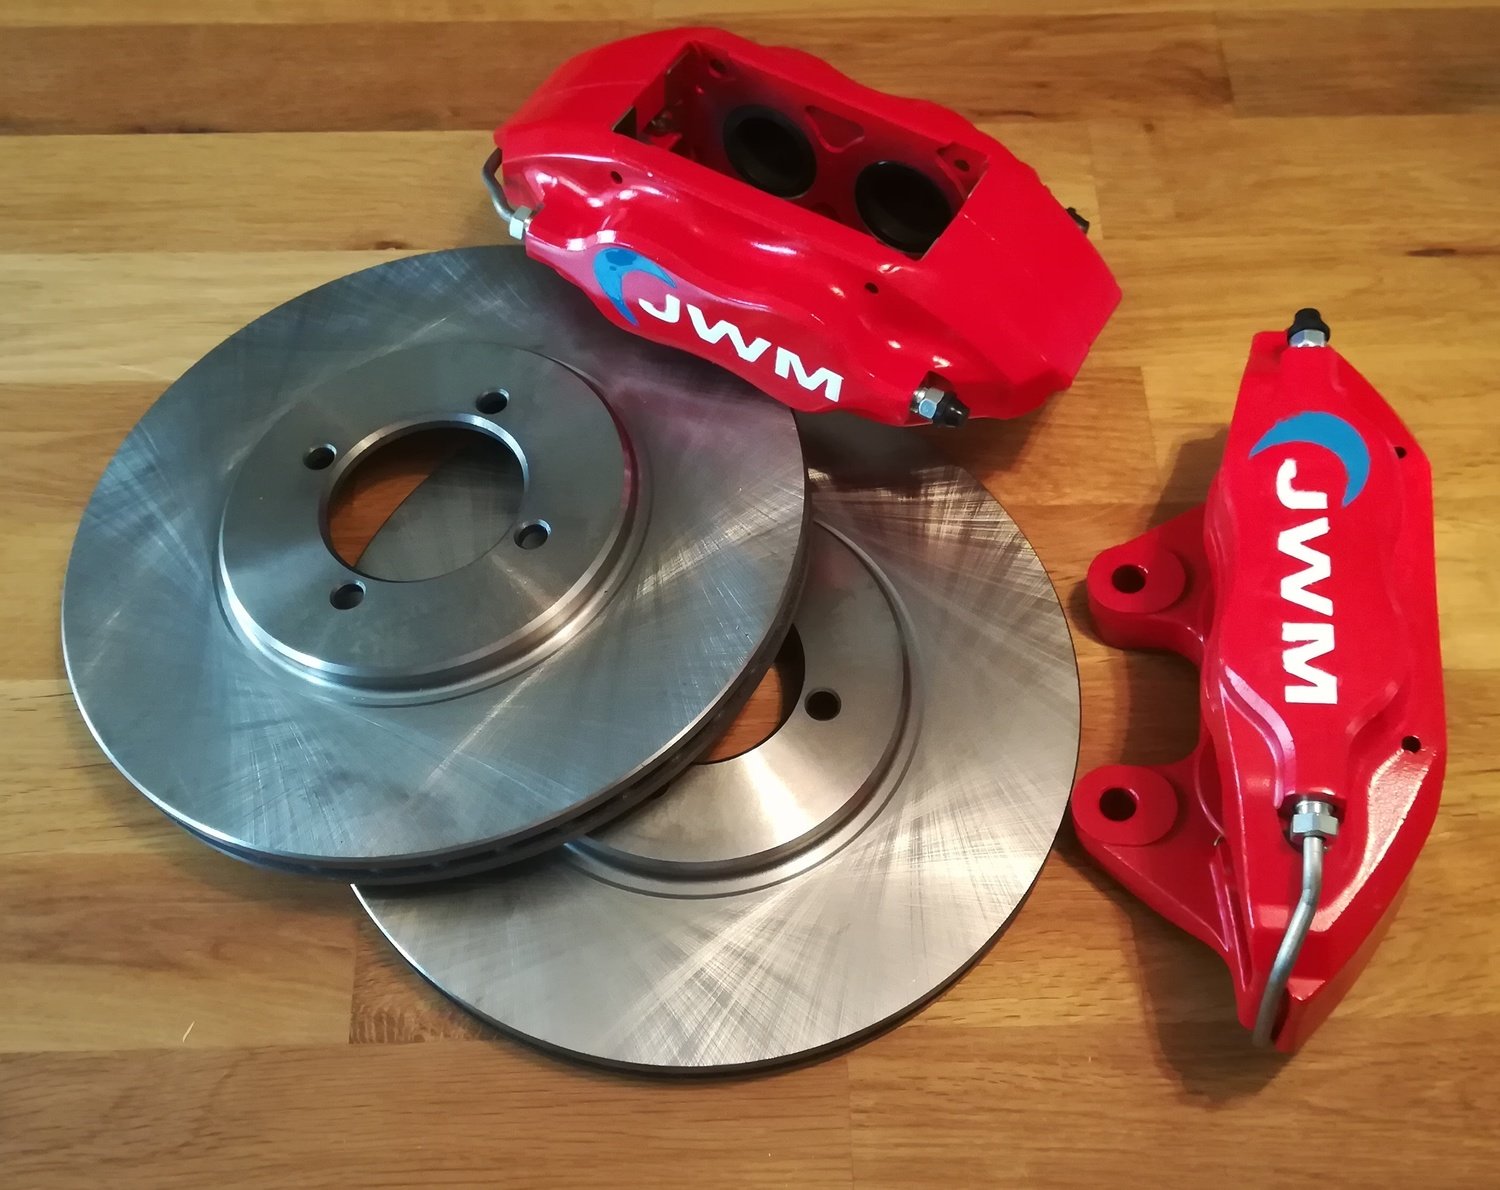 4 Pot "Big Brakes" Calipers with Vented Discs